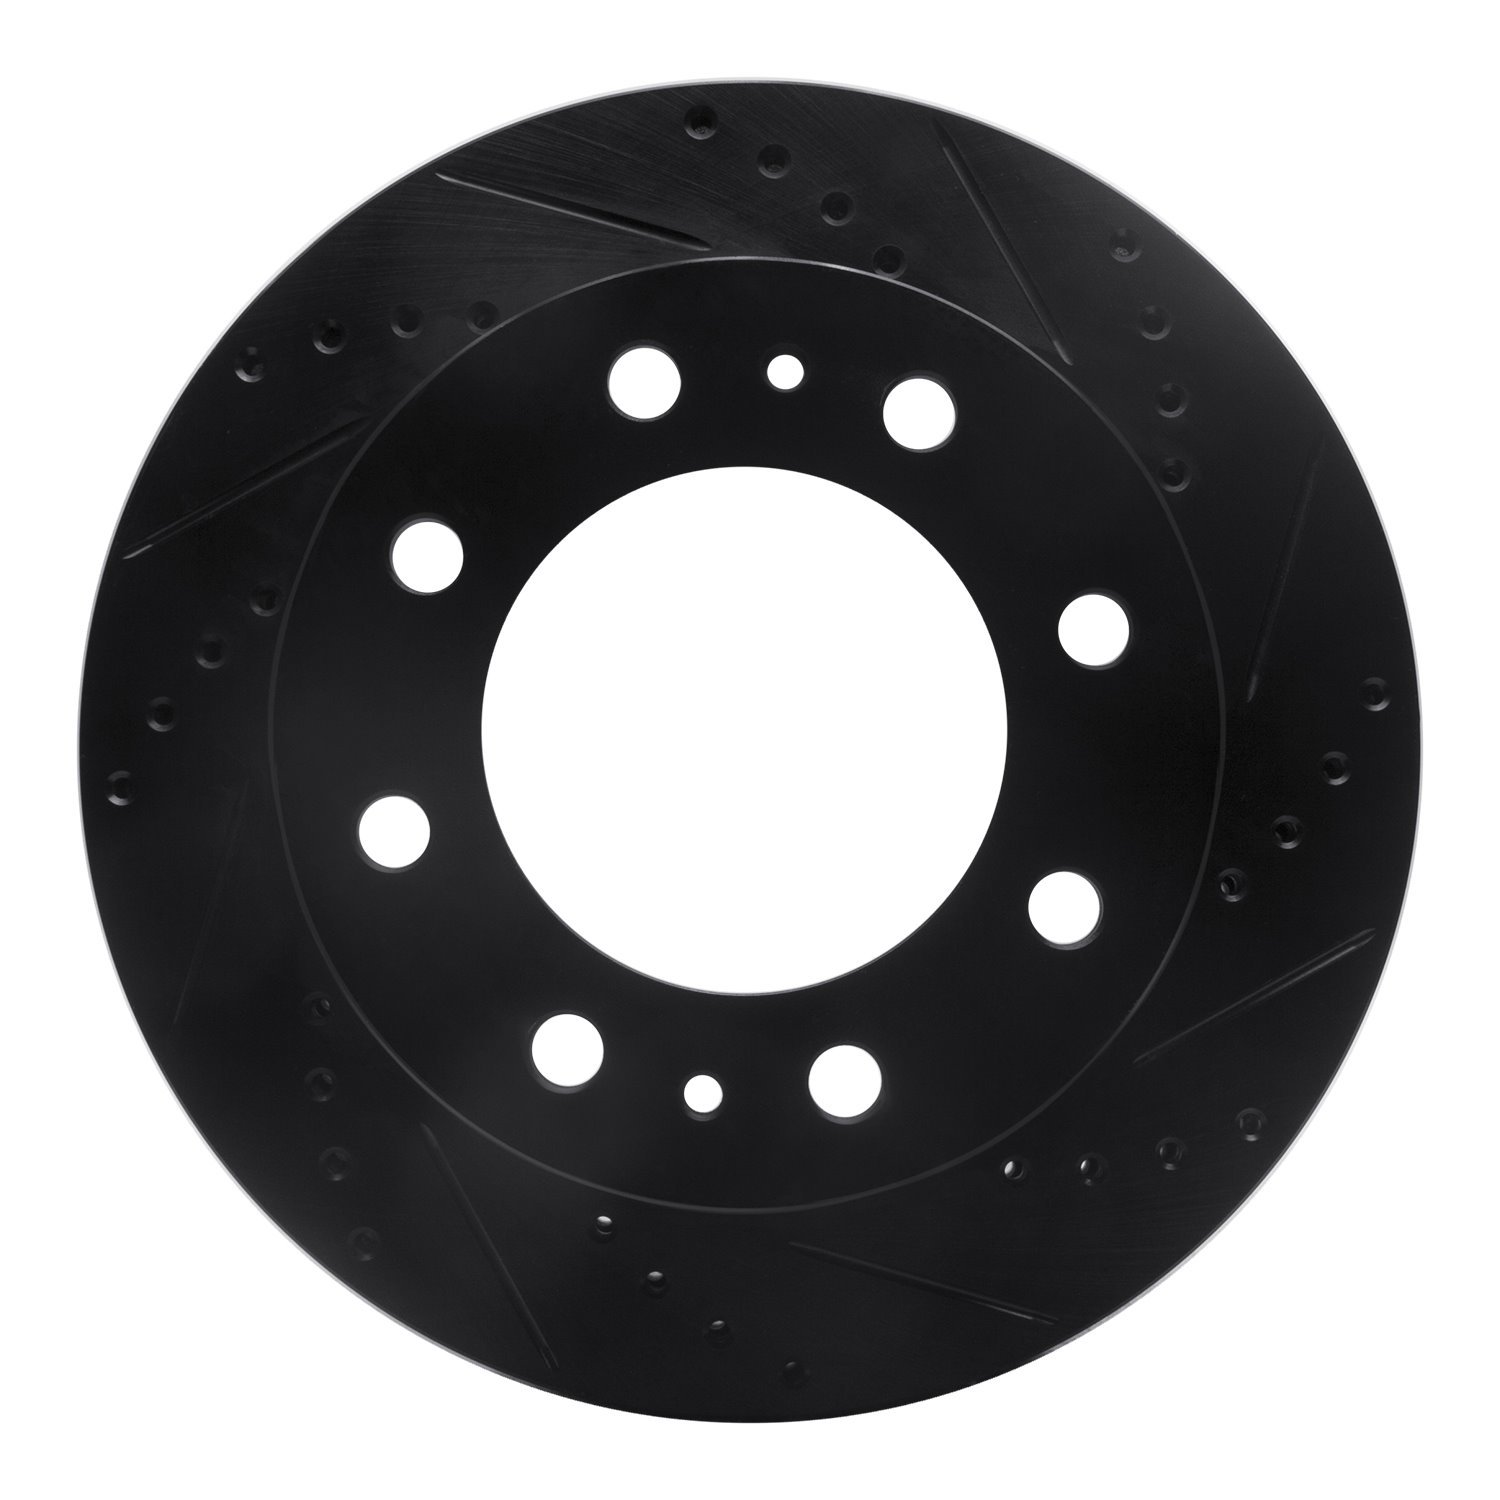 E-Line Drilled & Slotted Black Brake Rotor, Fits Select Mopar, Position: Rear Right